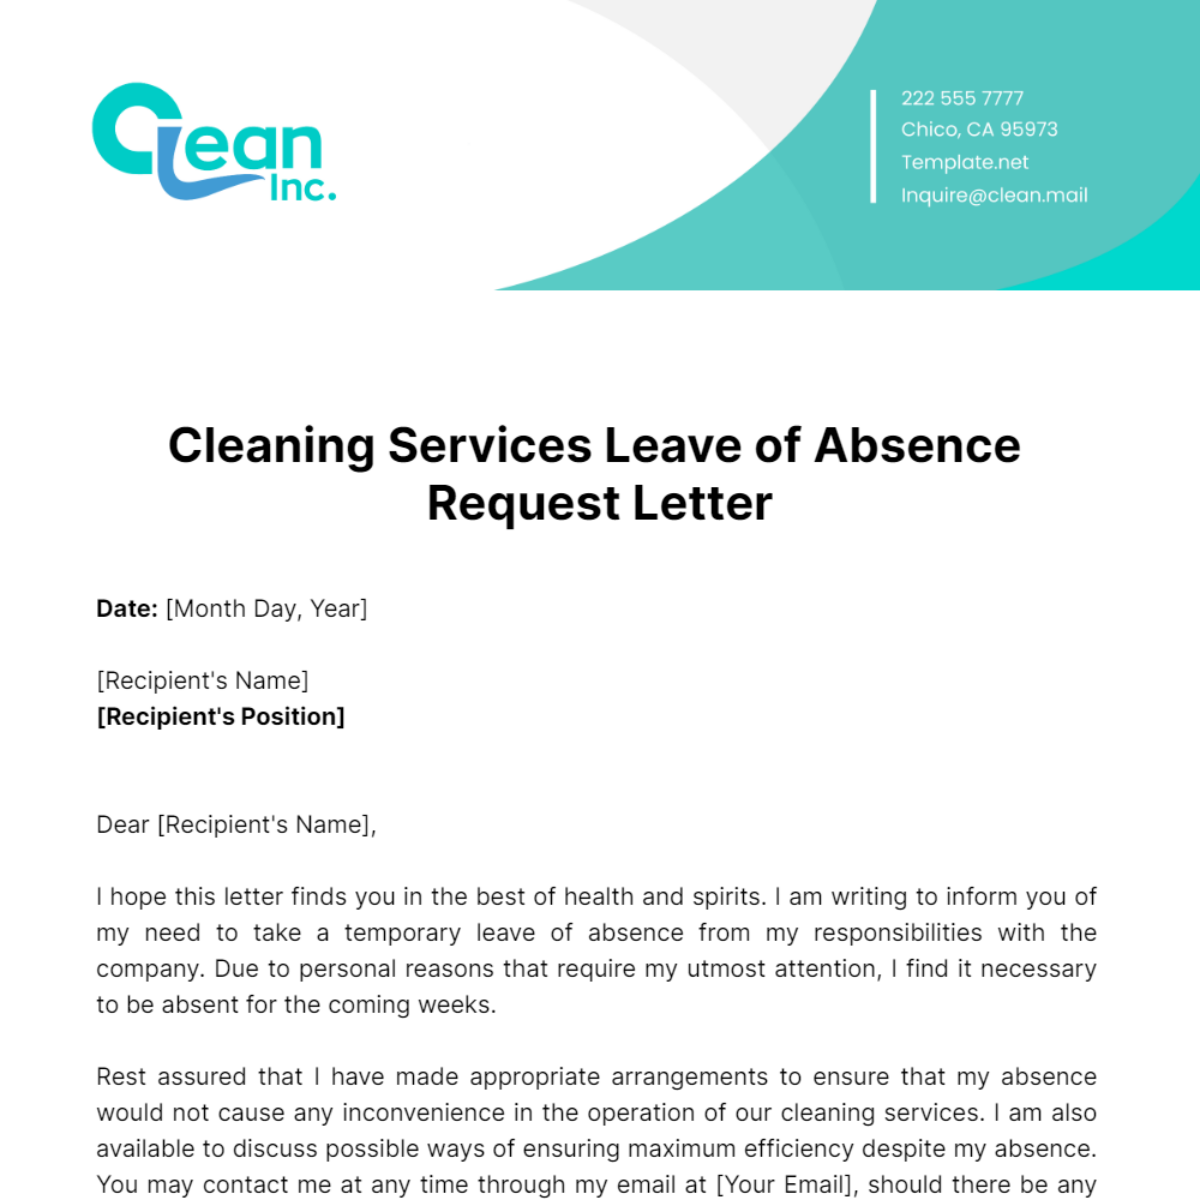 Cleaning Services Leave of Absence Request Letter Template